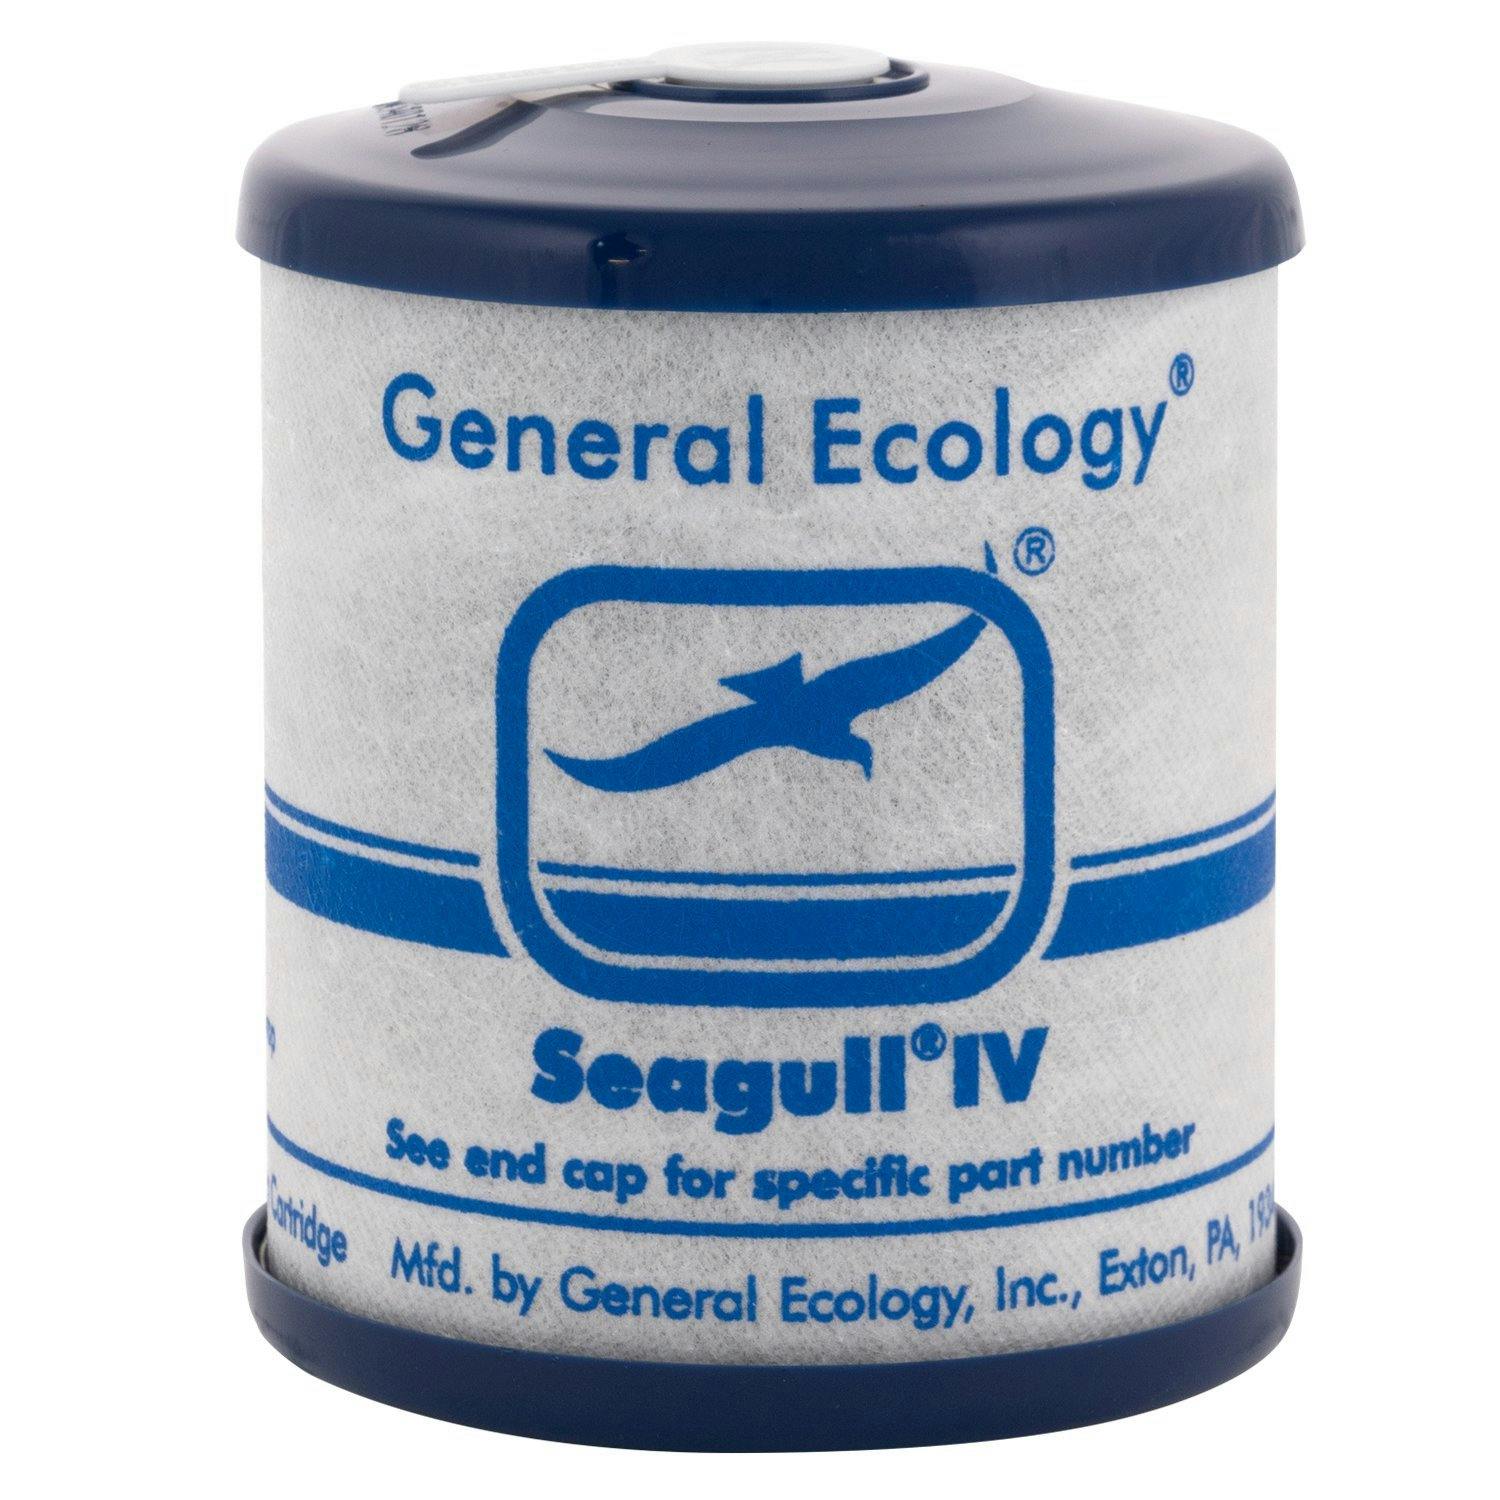 RS-1SG Seagull® IV Replacement Cartridge